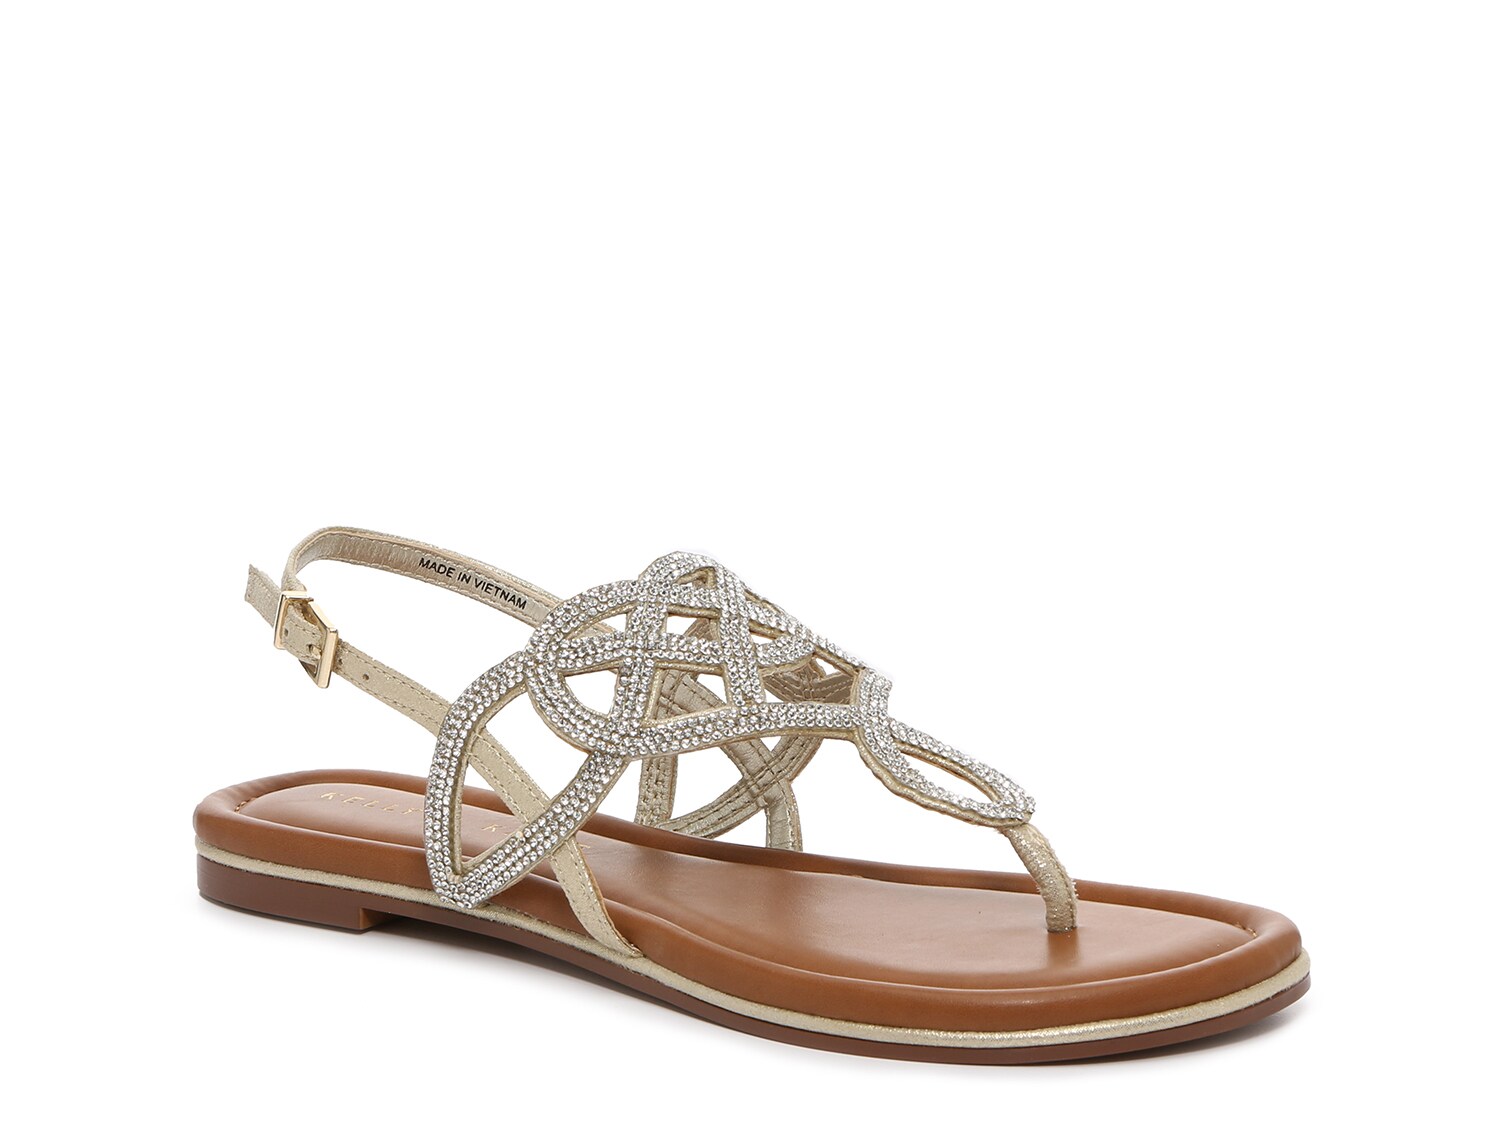 Kelly & Katie Payden Sandal - Free Shipping | DSW